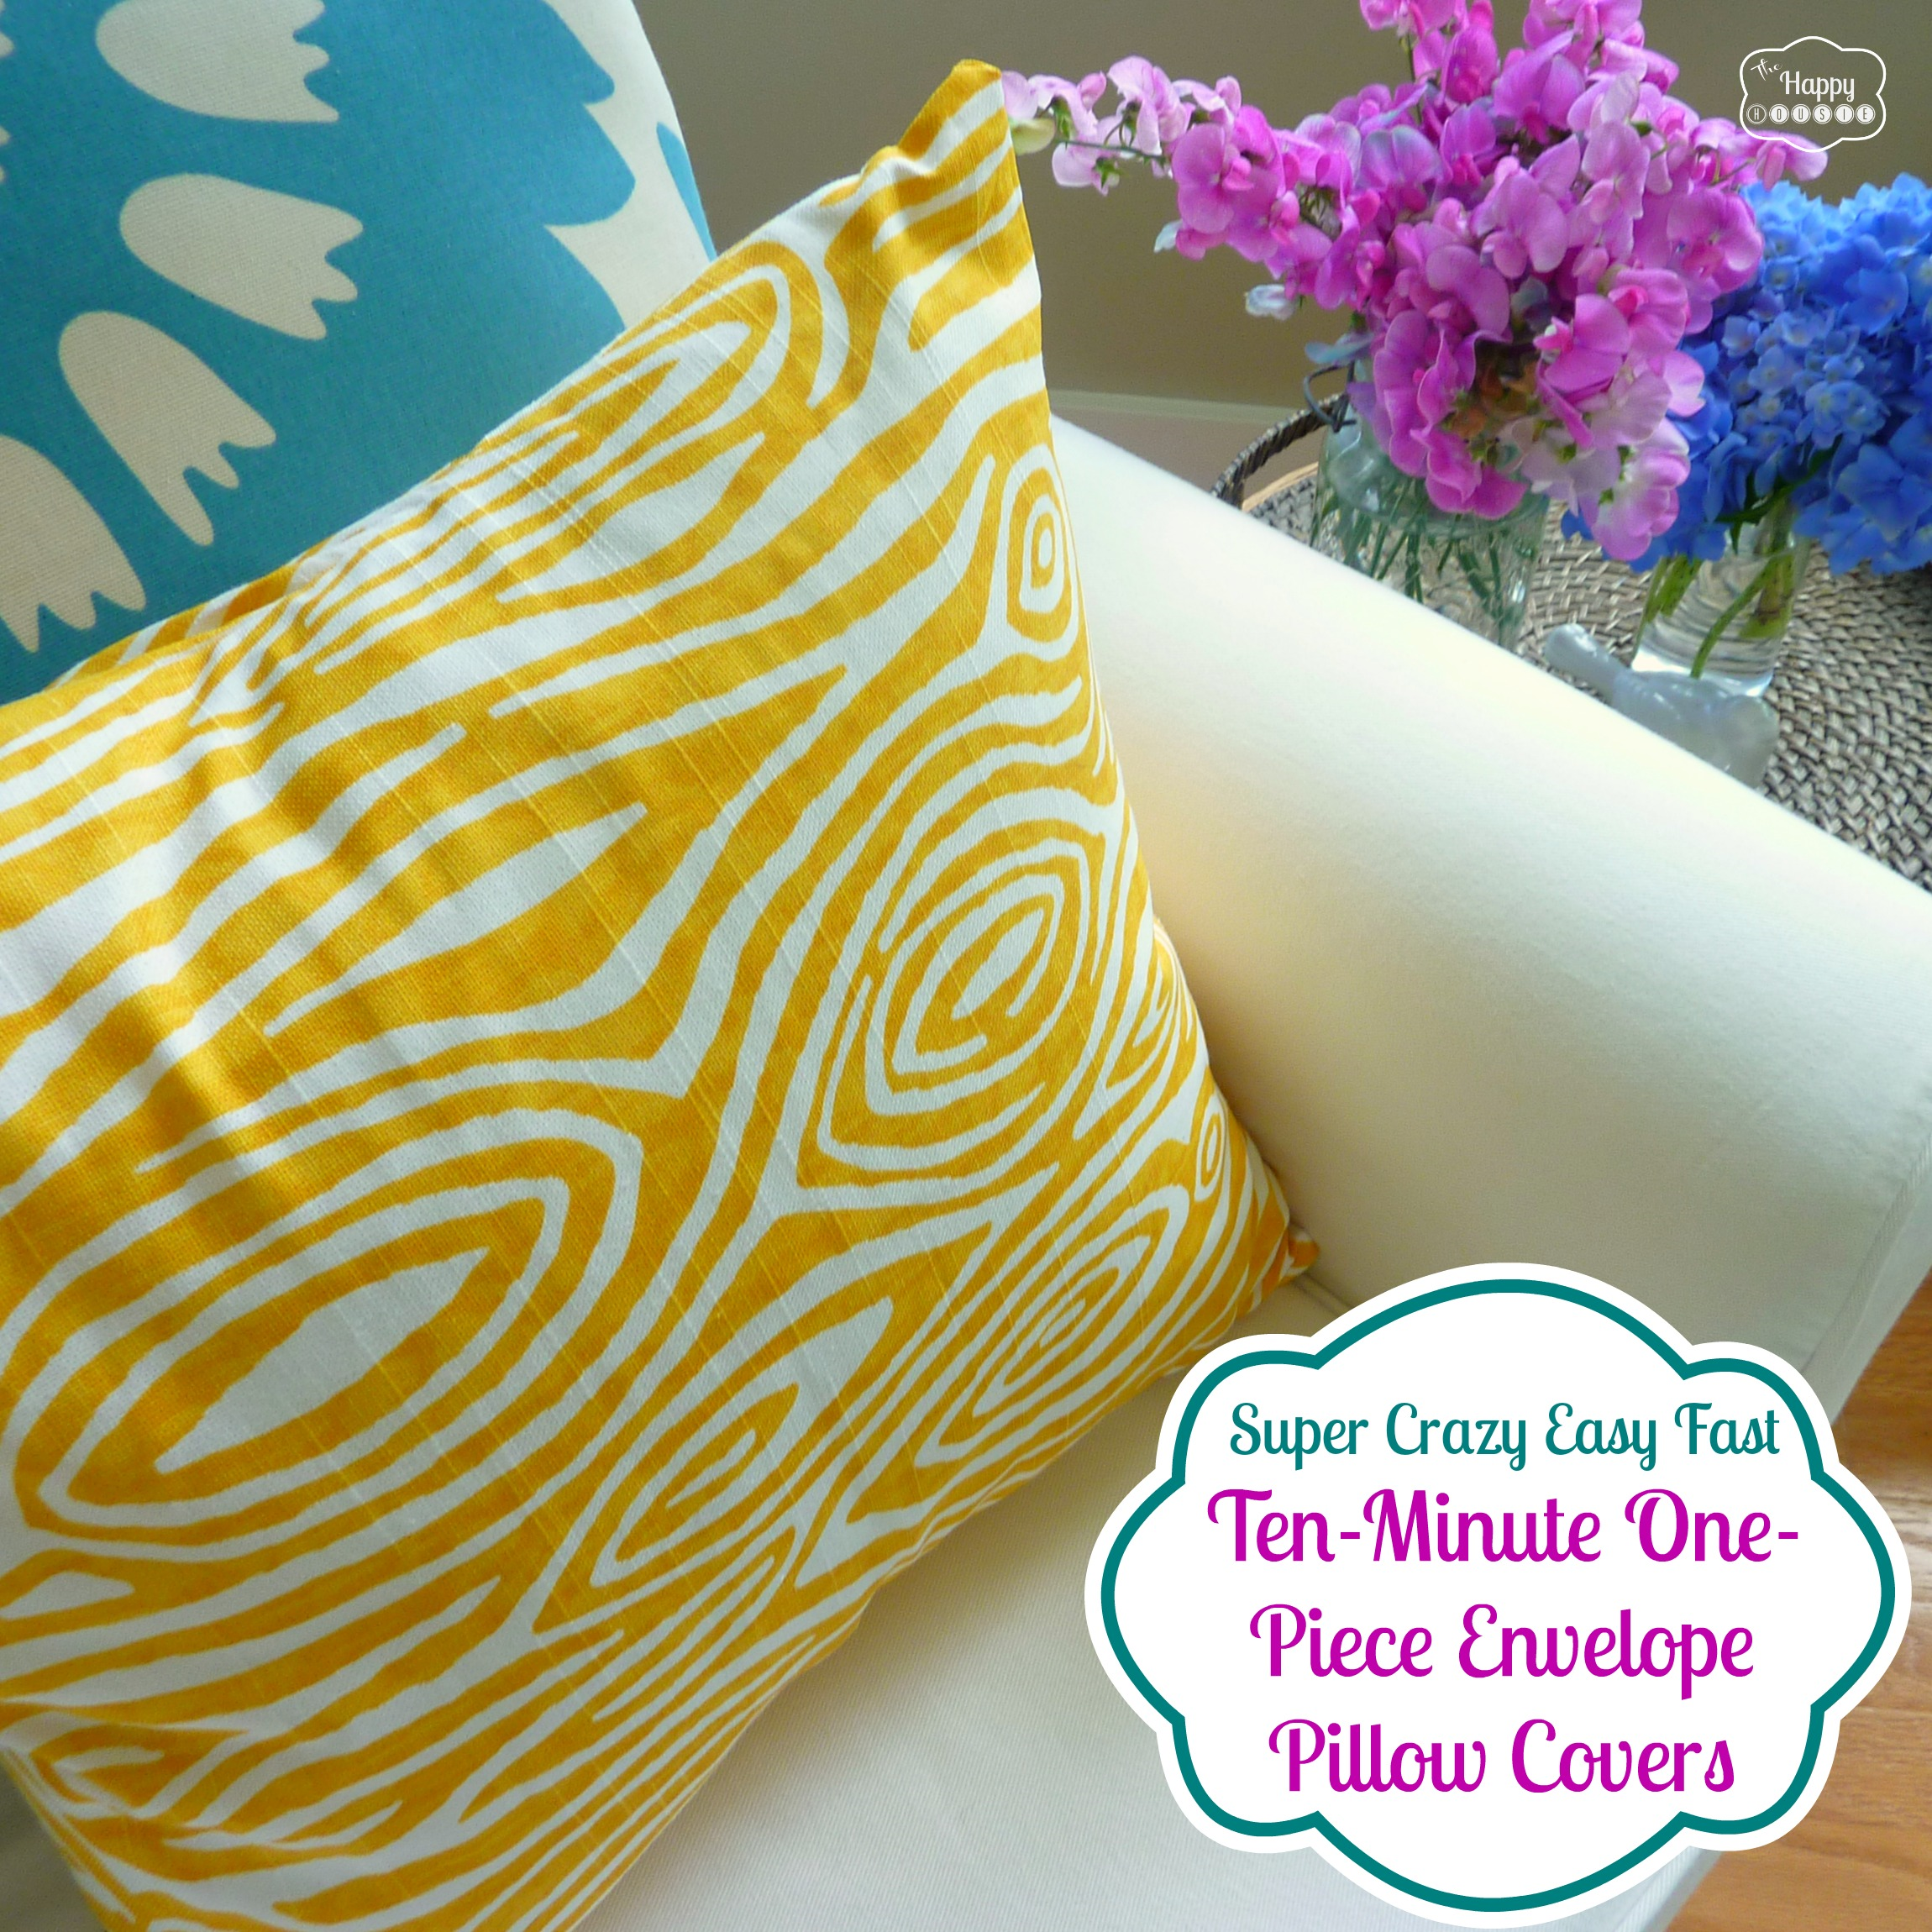 Super Crazy Easy Fast Ten-Minute One-Piece Envelope Pillow Covers